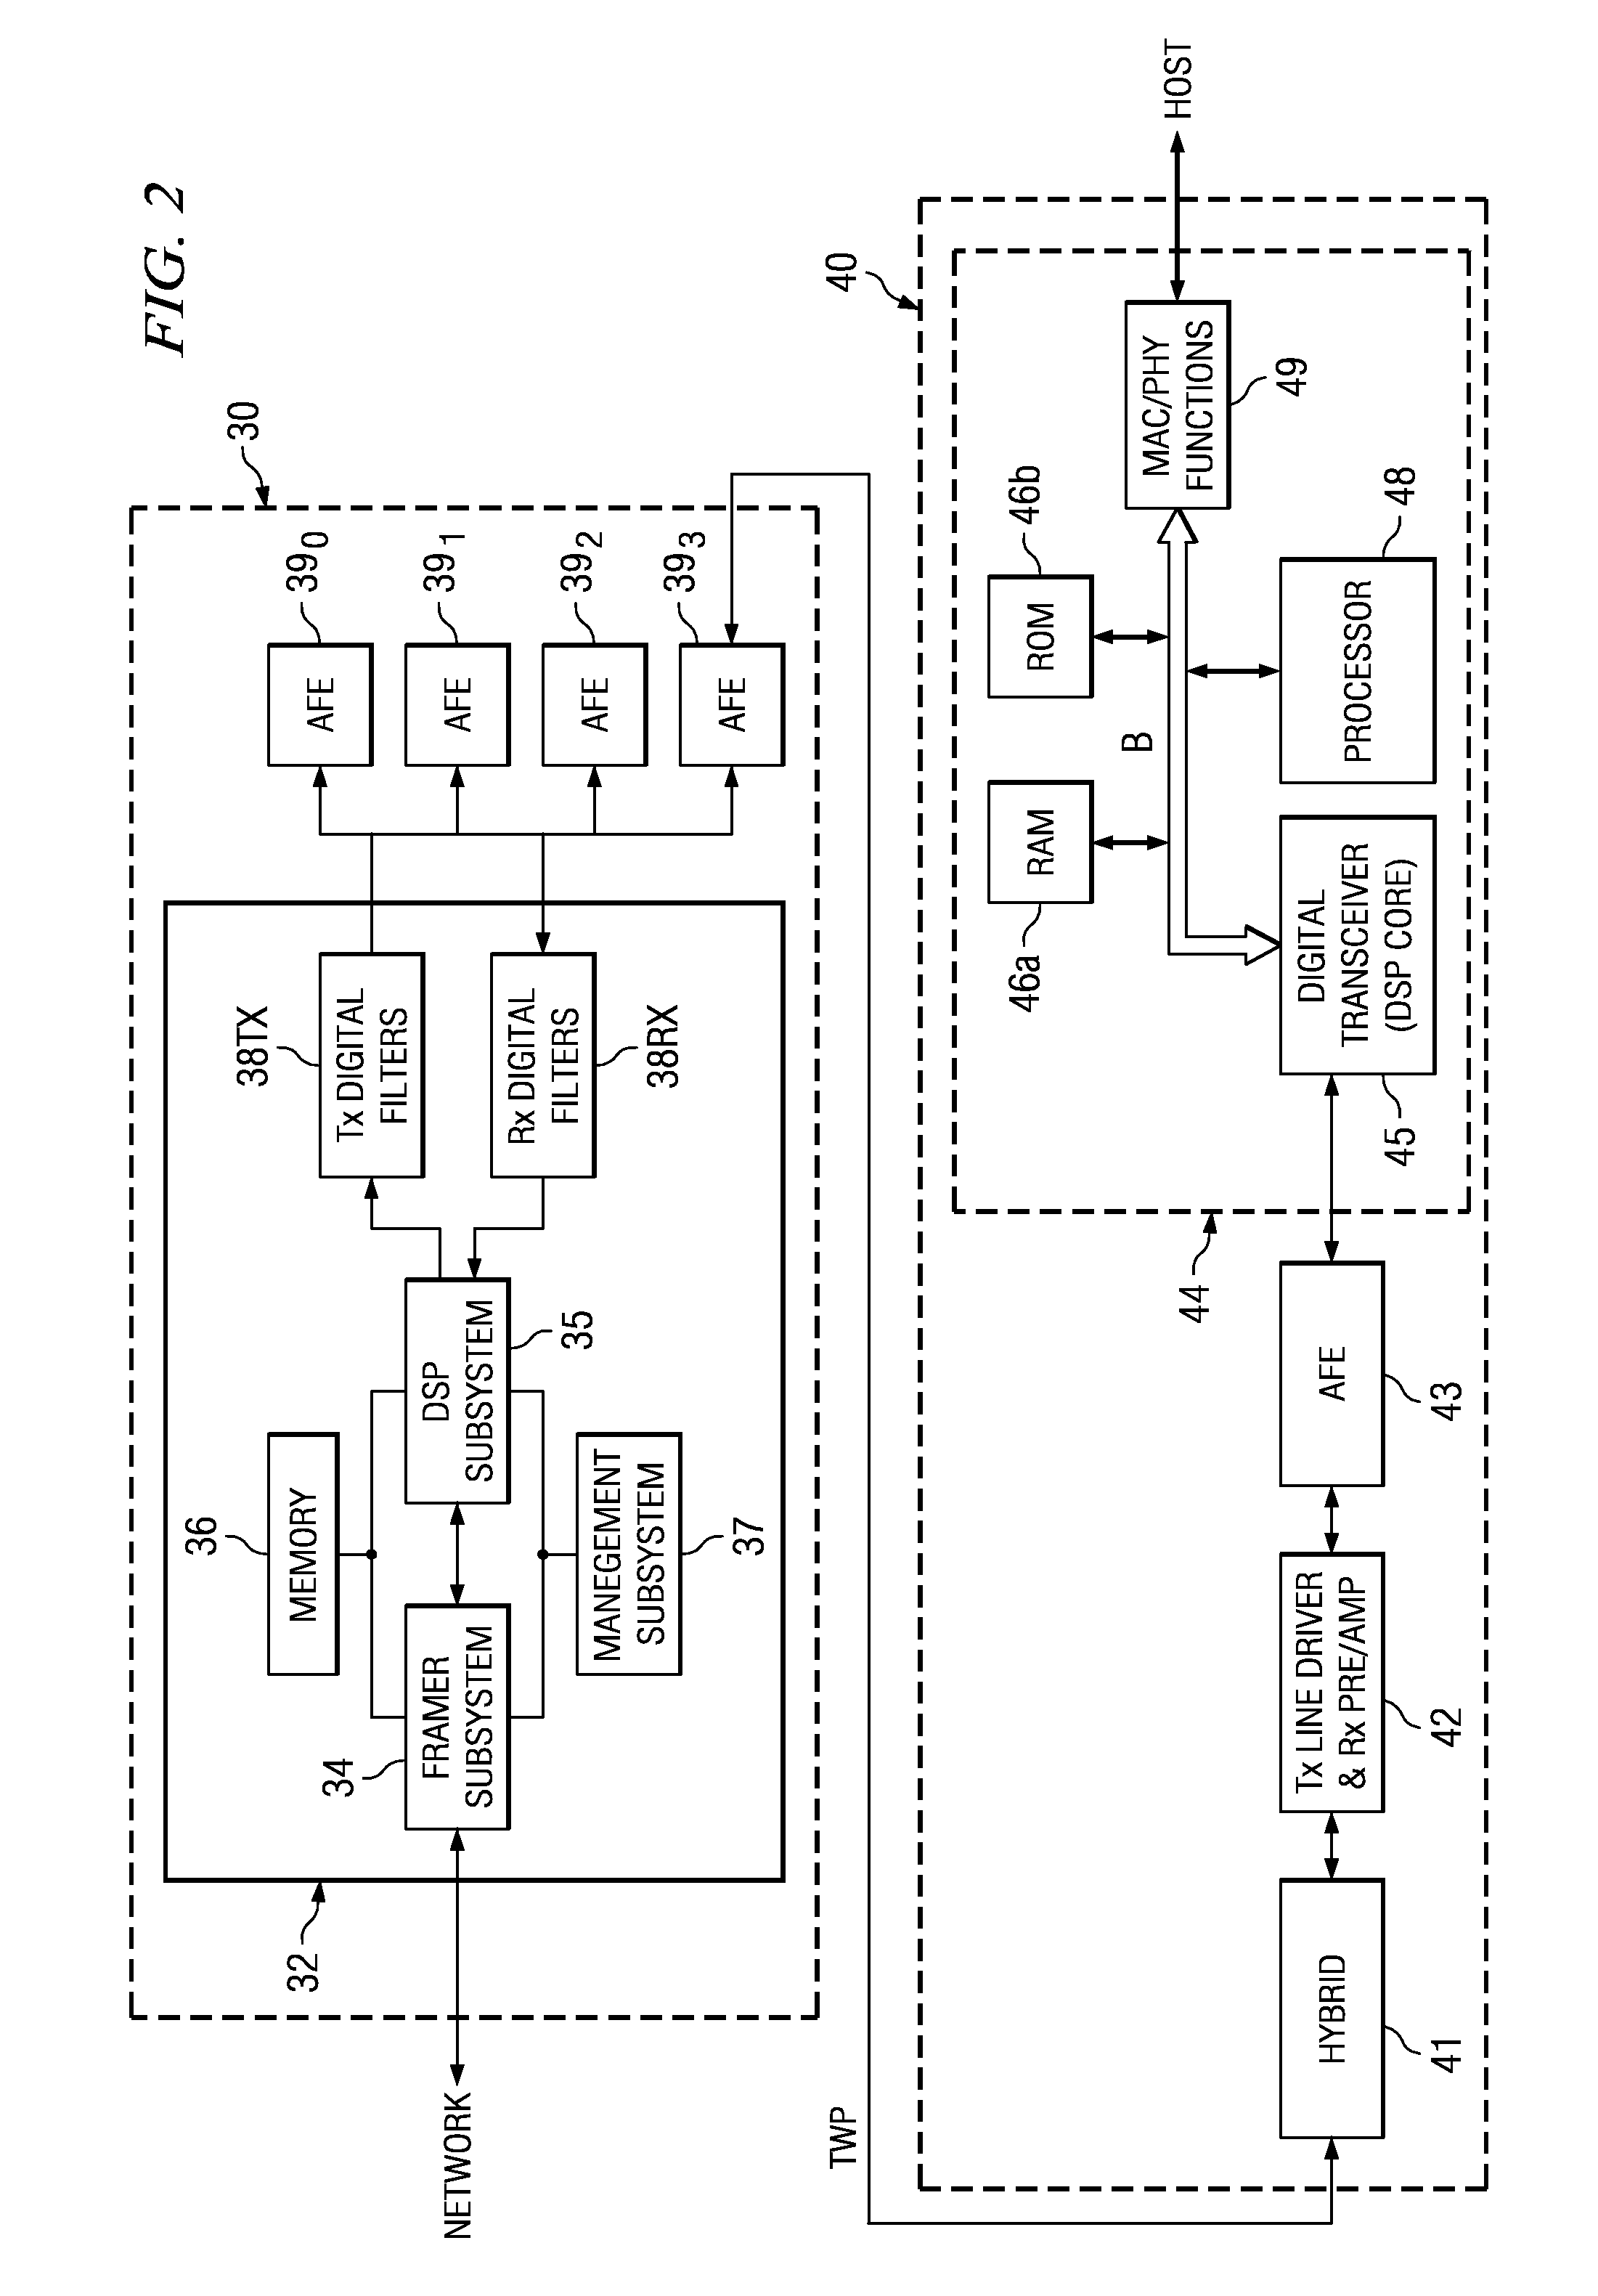 Optimized short initialization after low power mode for digital subscriber line (DSL) communications